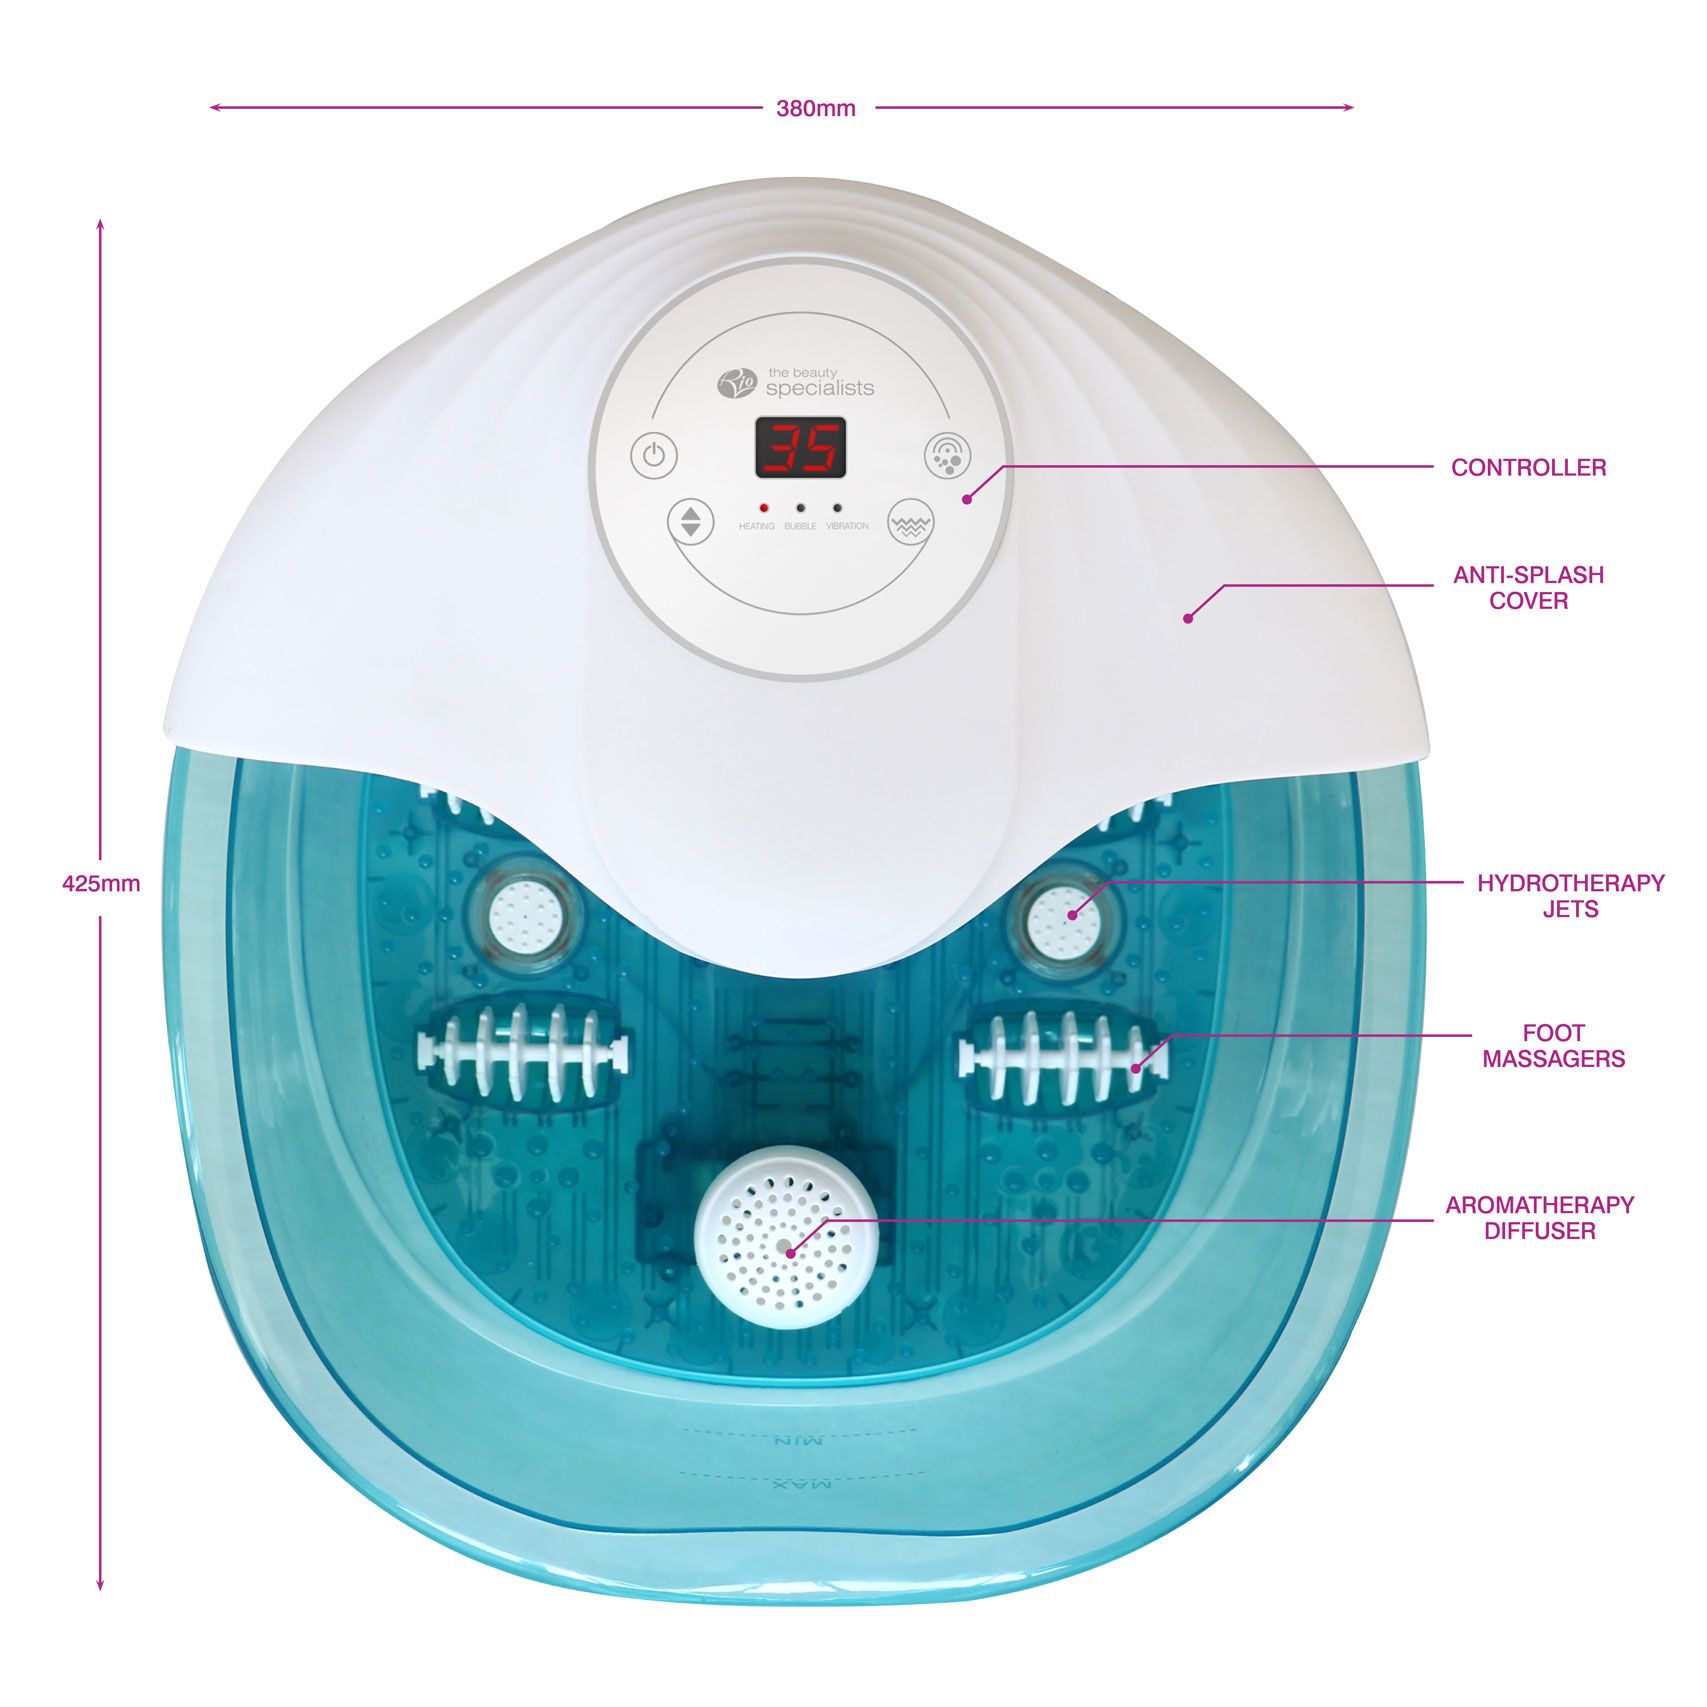 Luxury foot bath spa & massager with arrows labelling height 425mm and width 380mm and arrows pointing to controller, anti-splash cover, hydrotherapy jets, foot massagers and aromatherapy diffuser